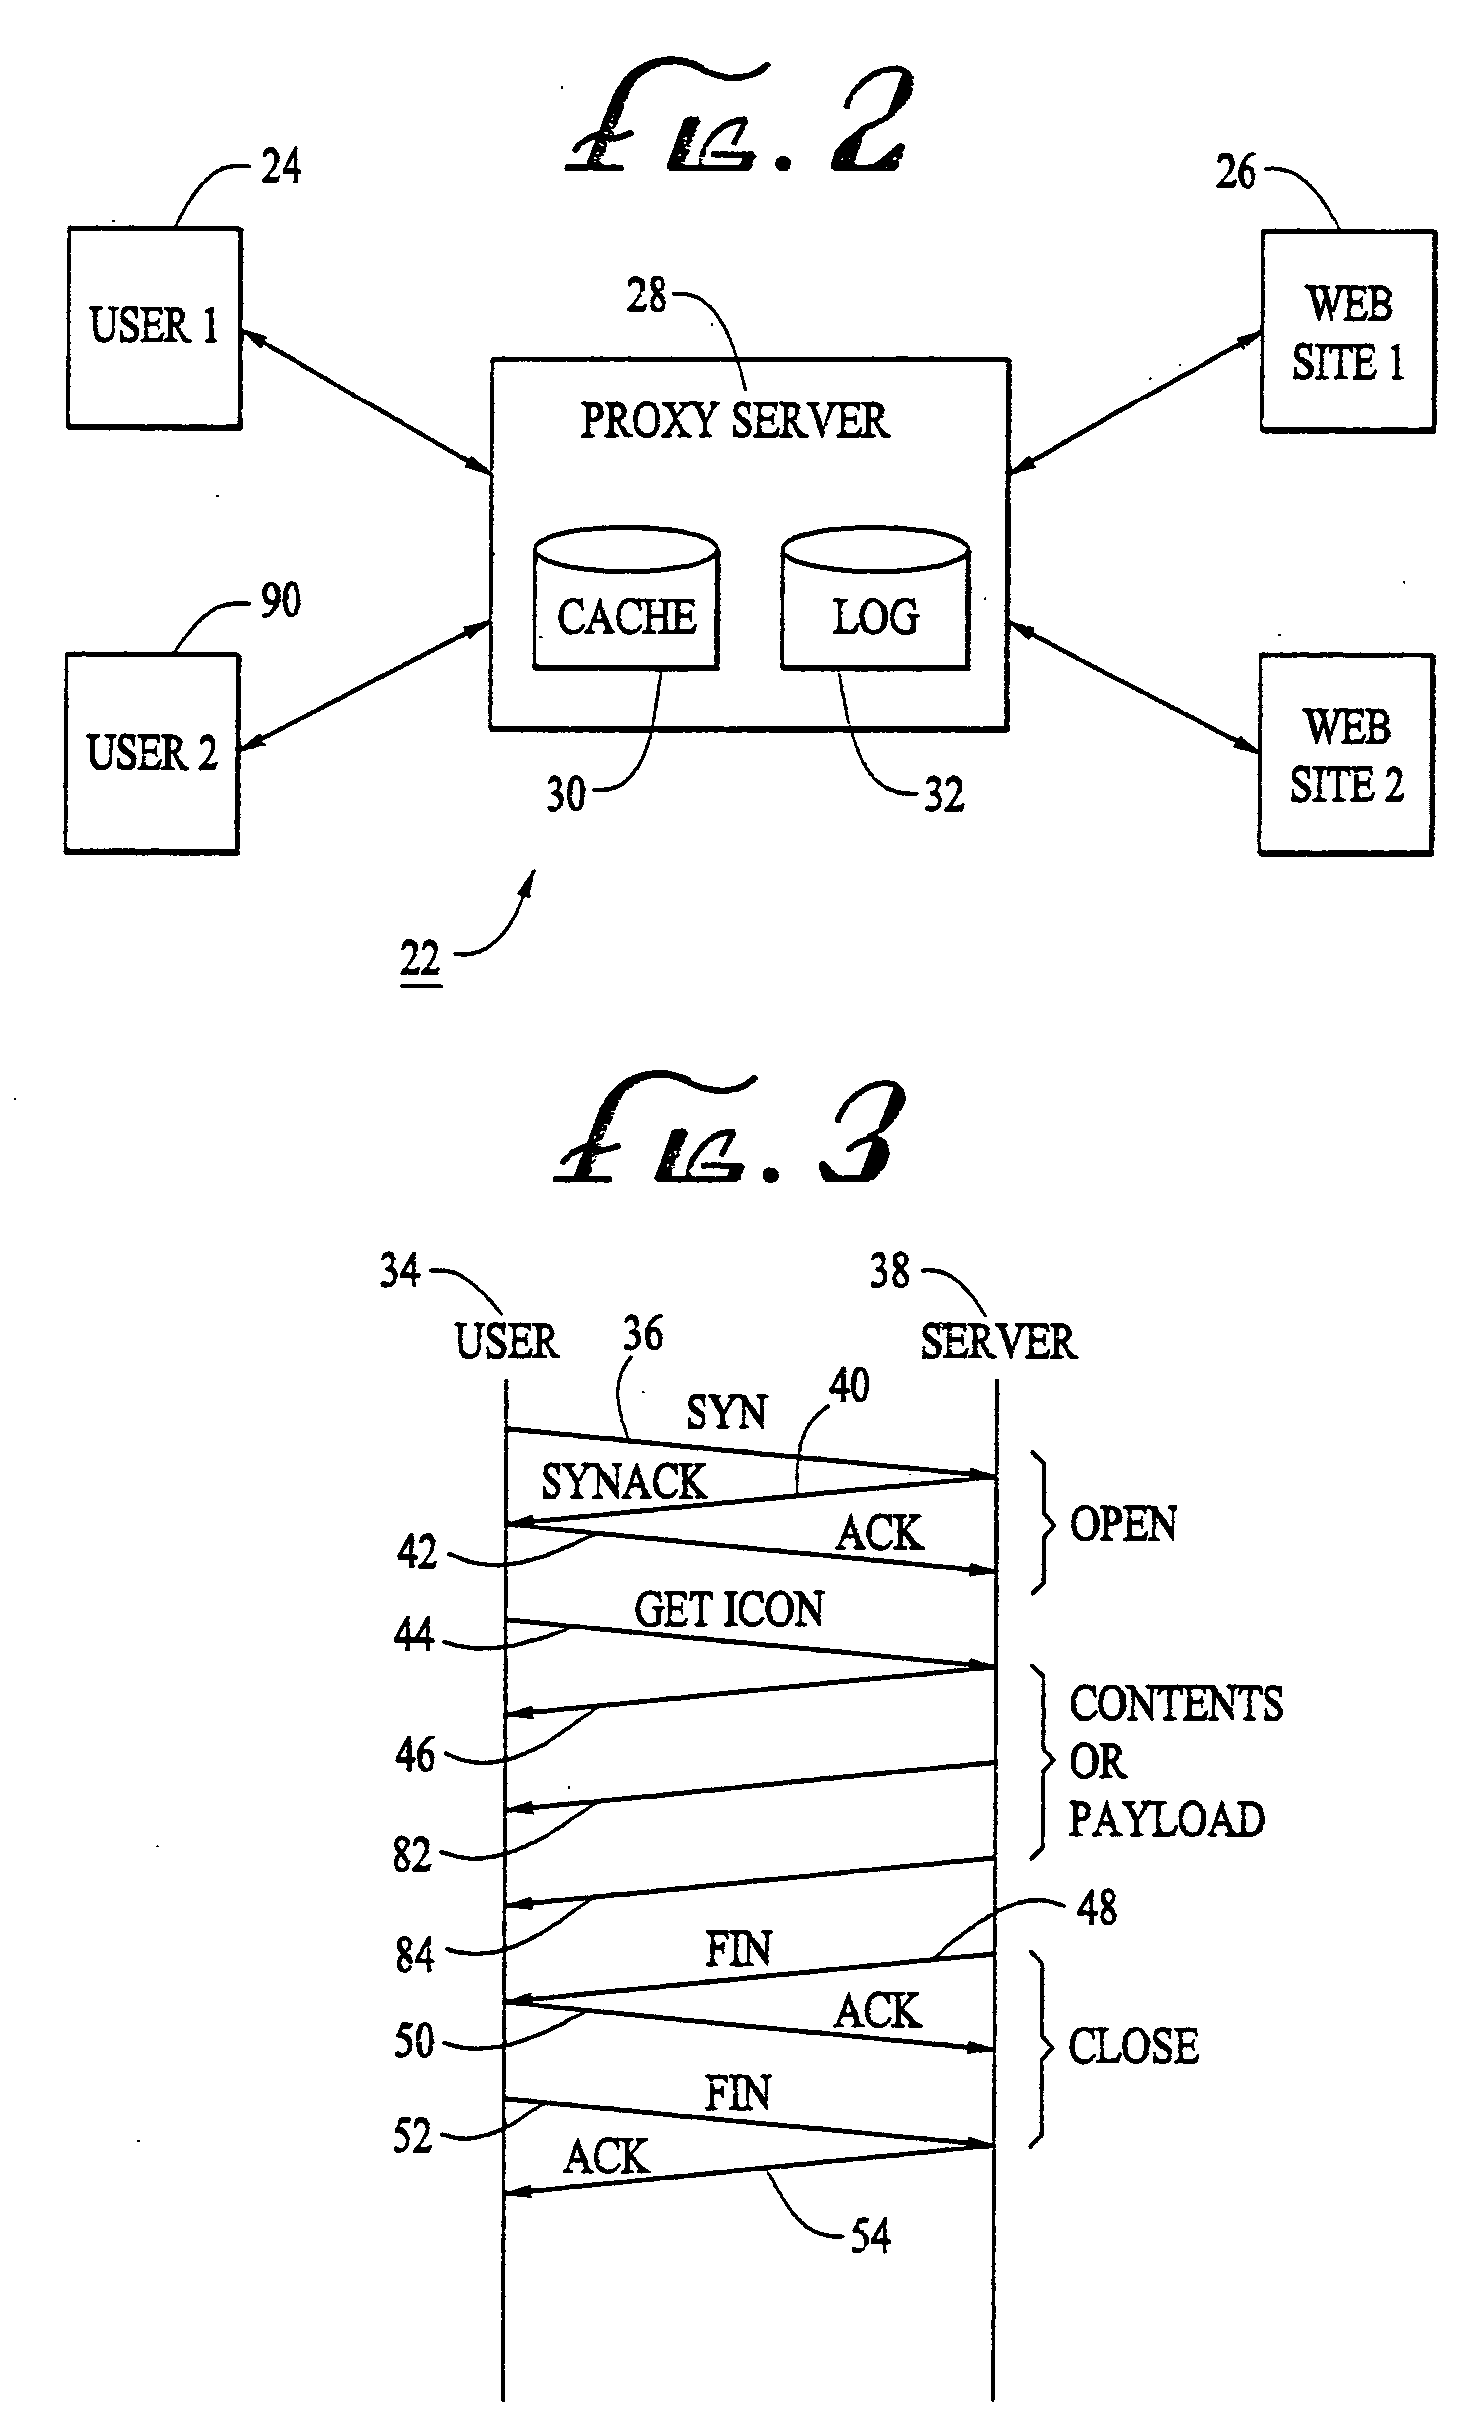 System and method for intelligent web content fetch and delivery of any whole and partial undelivered objects in ascending order of object size